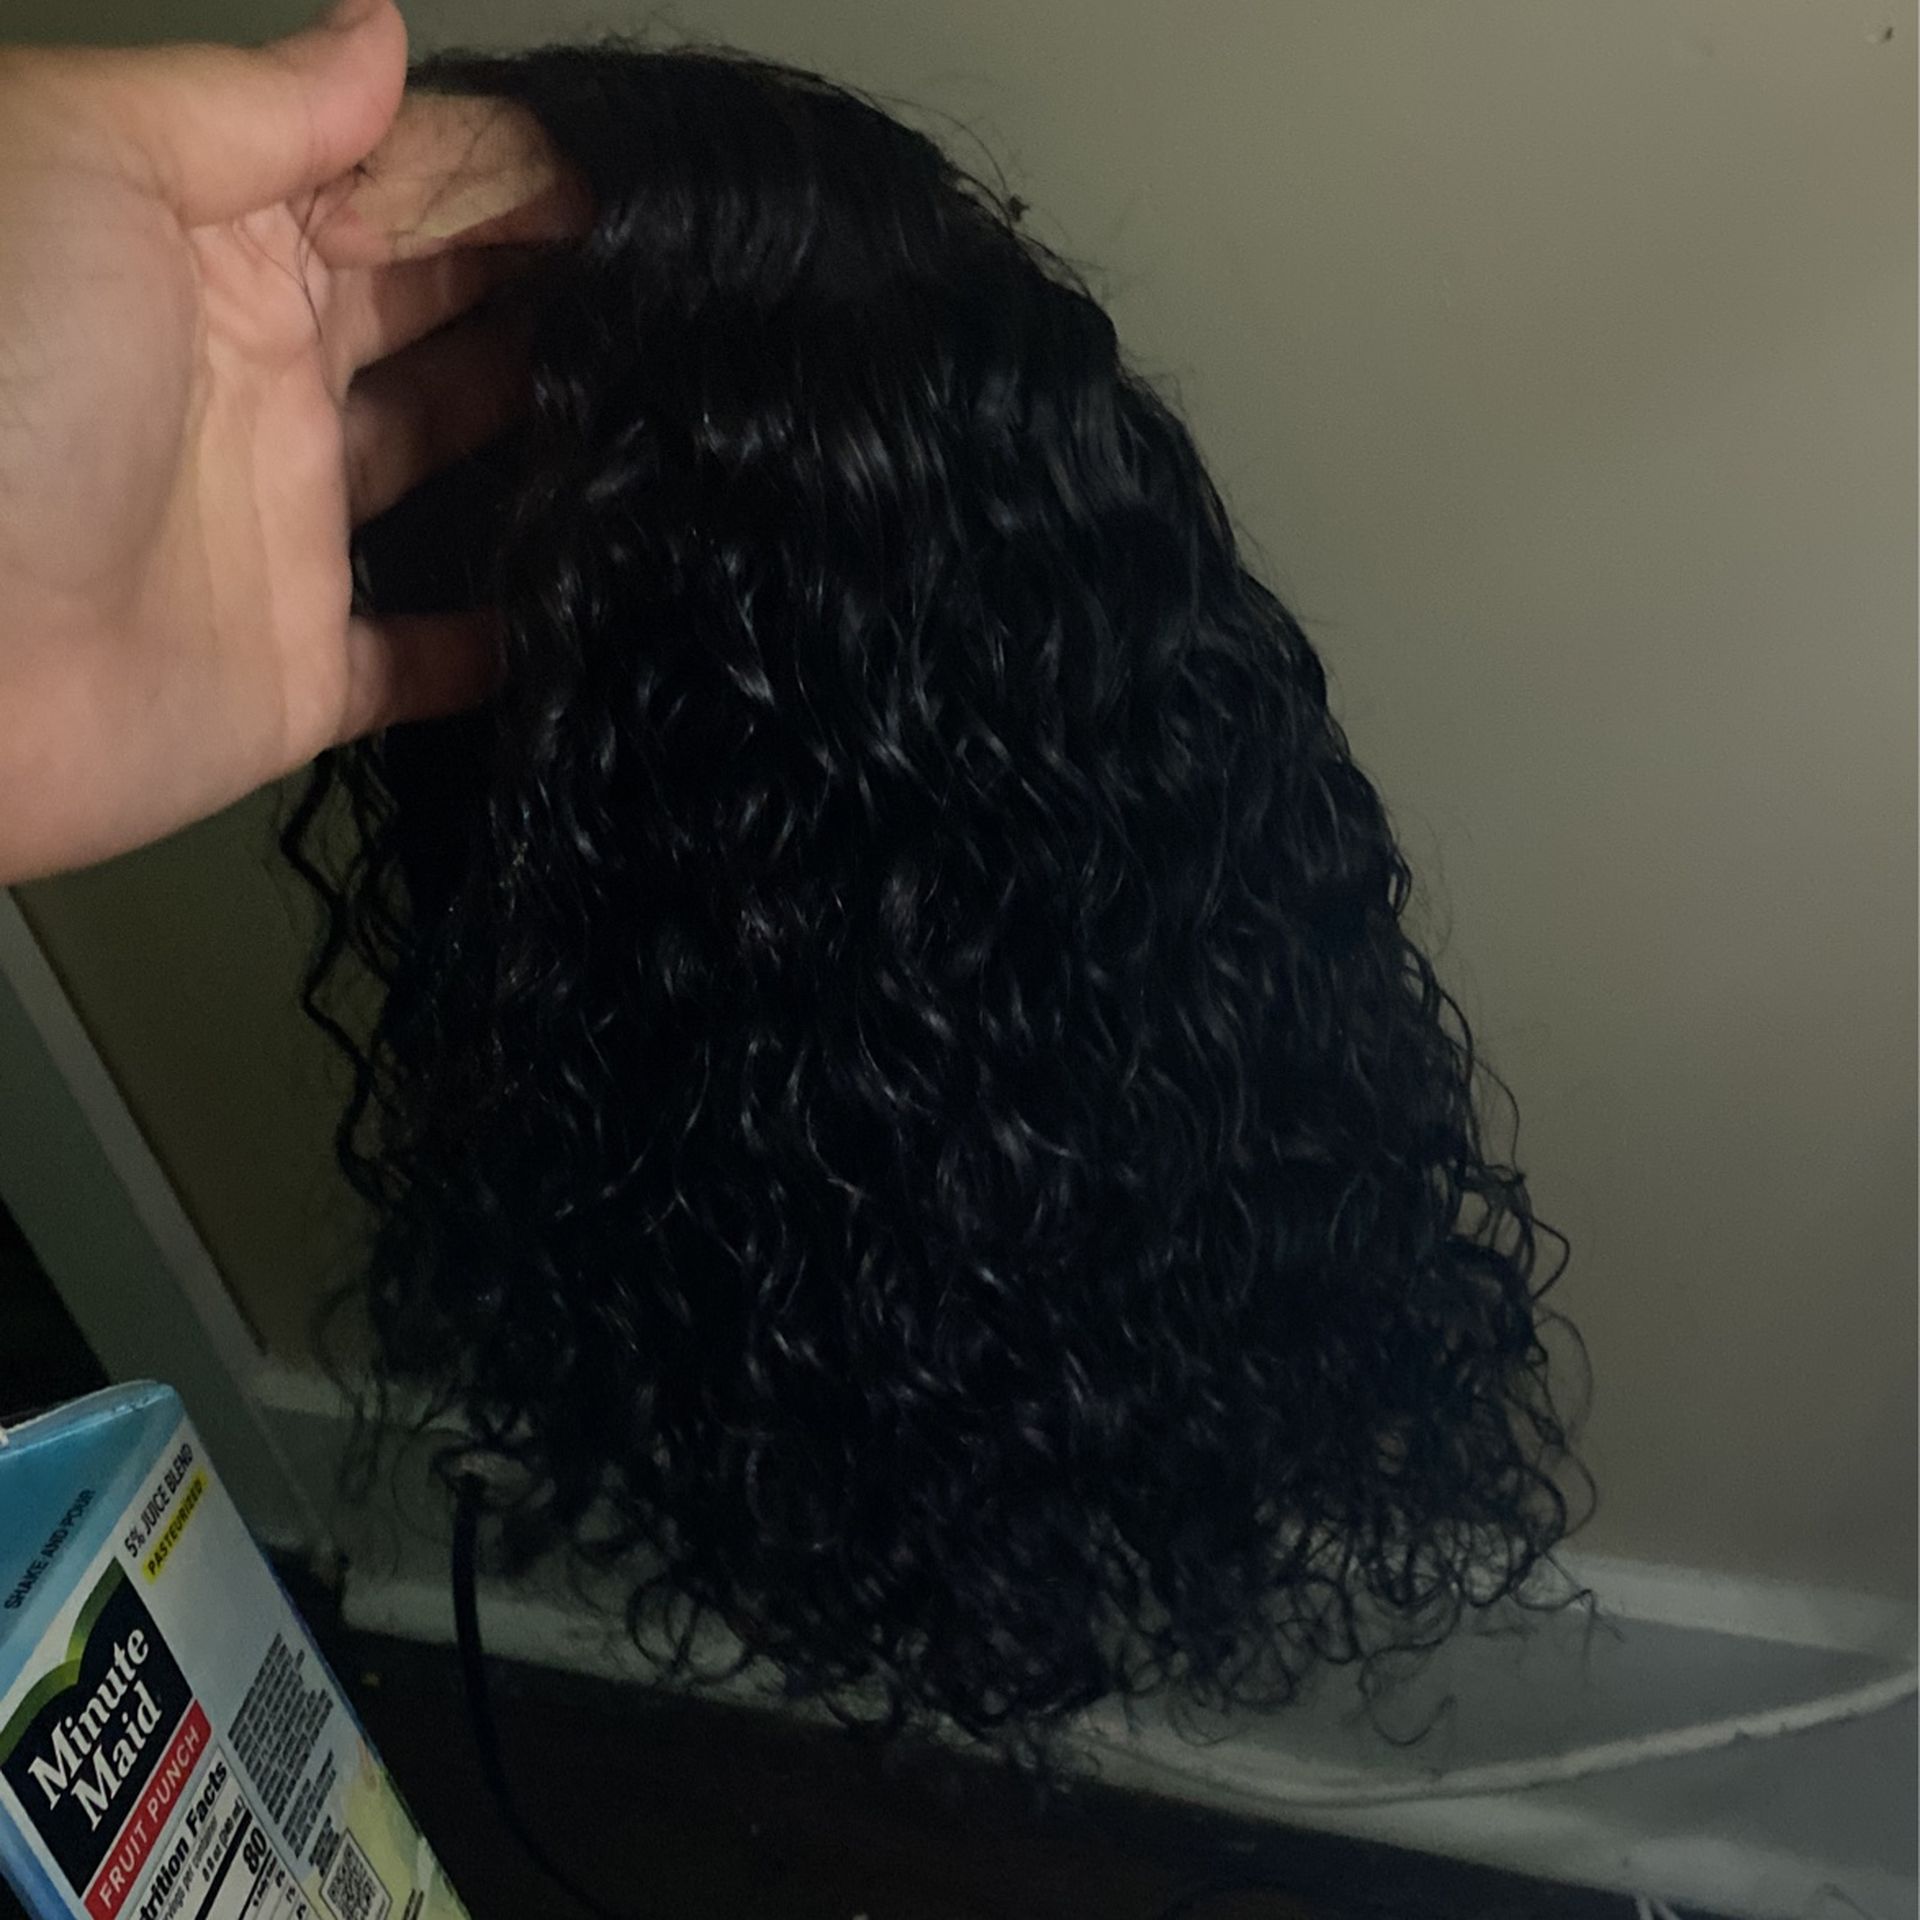 Brand New HUMAN HAIR Curly Wig. 